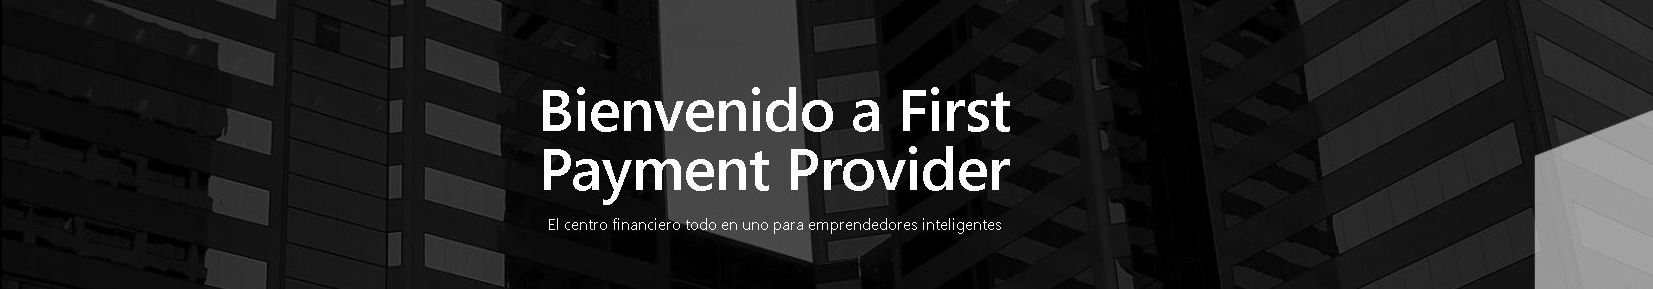 First Payment Provider CO's profile banner